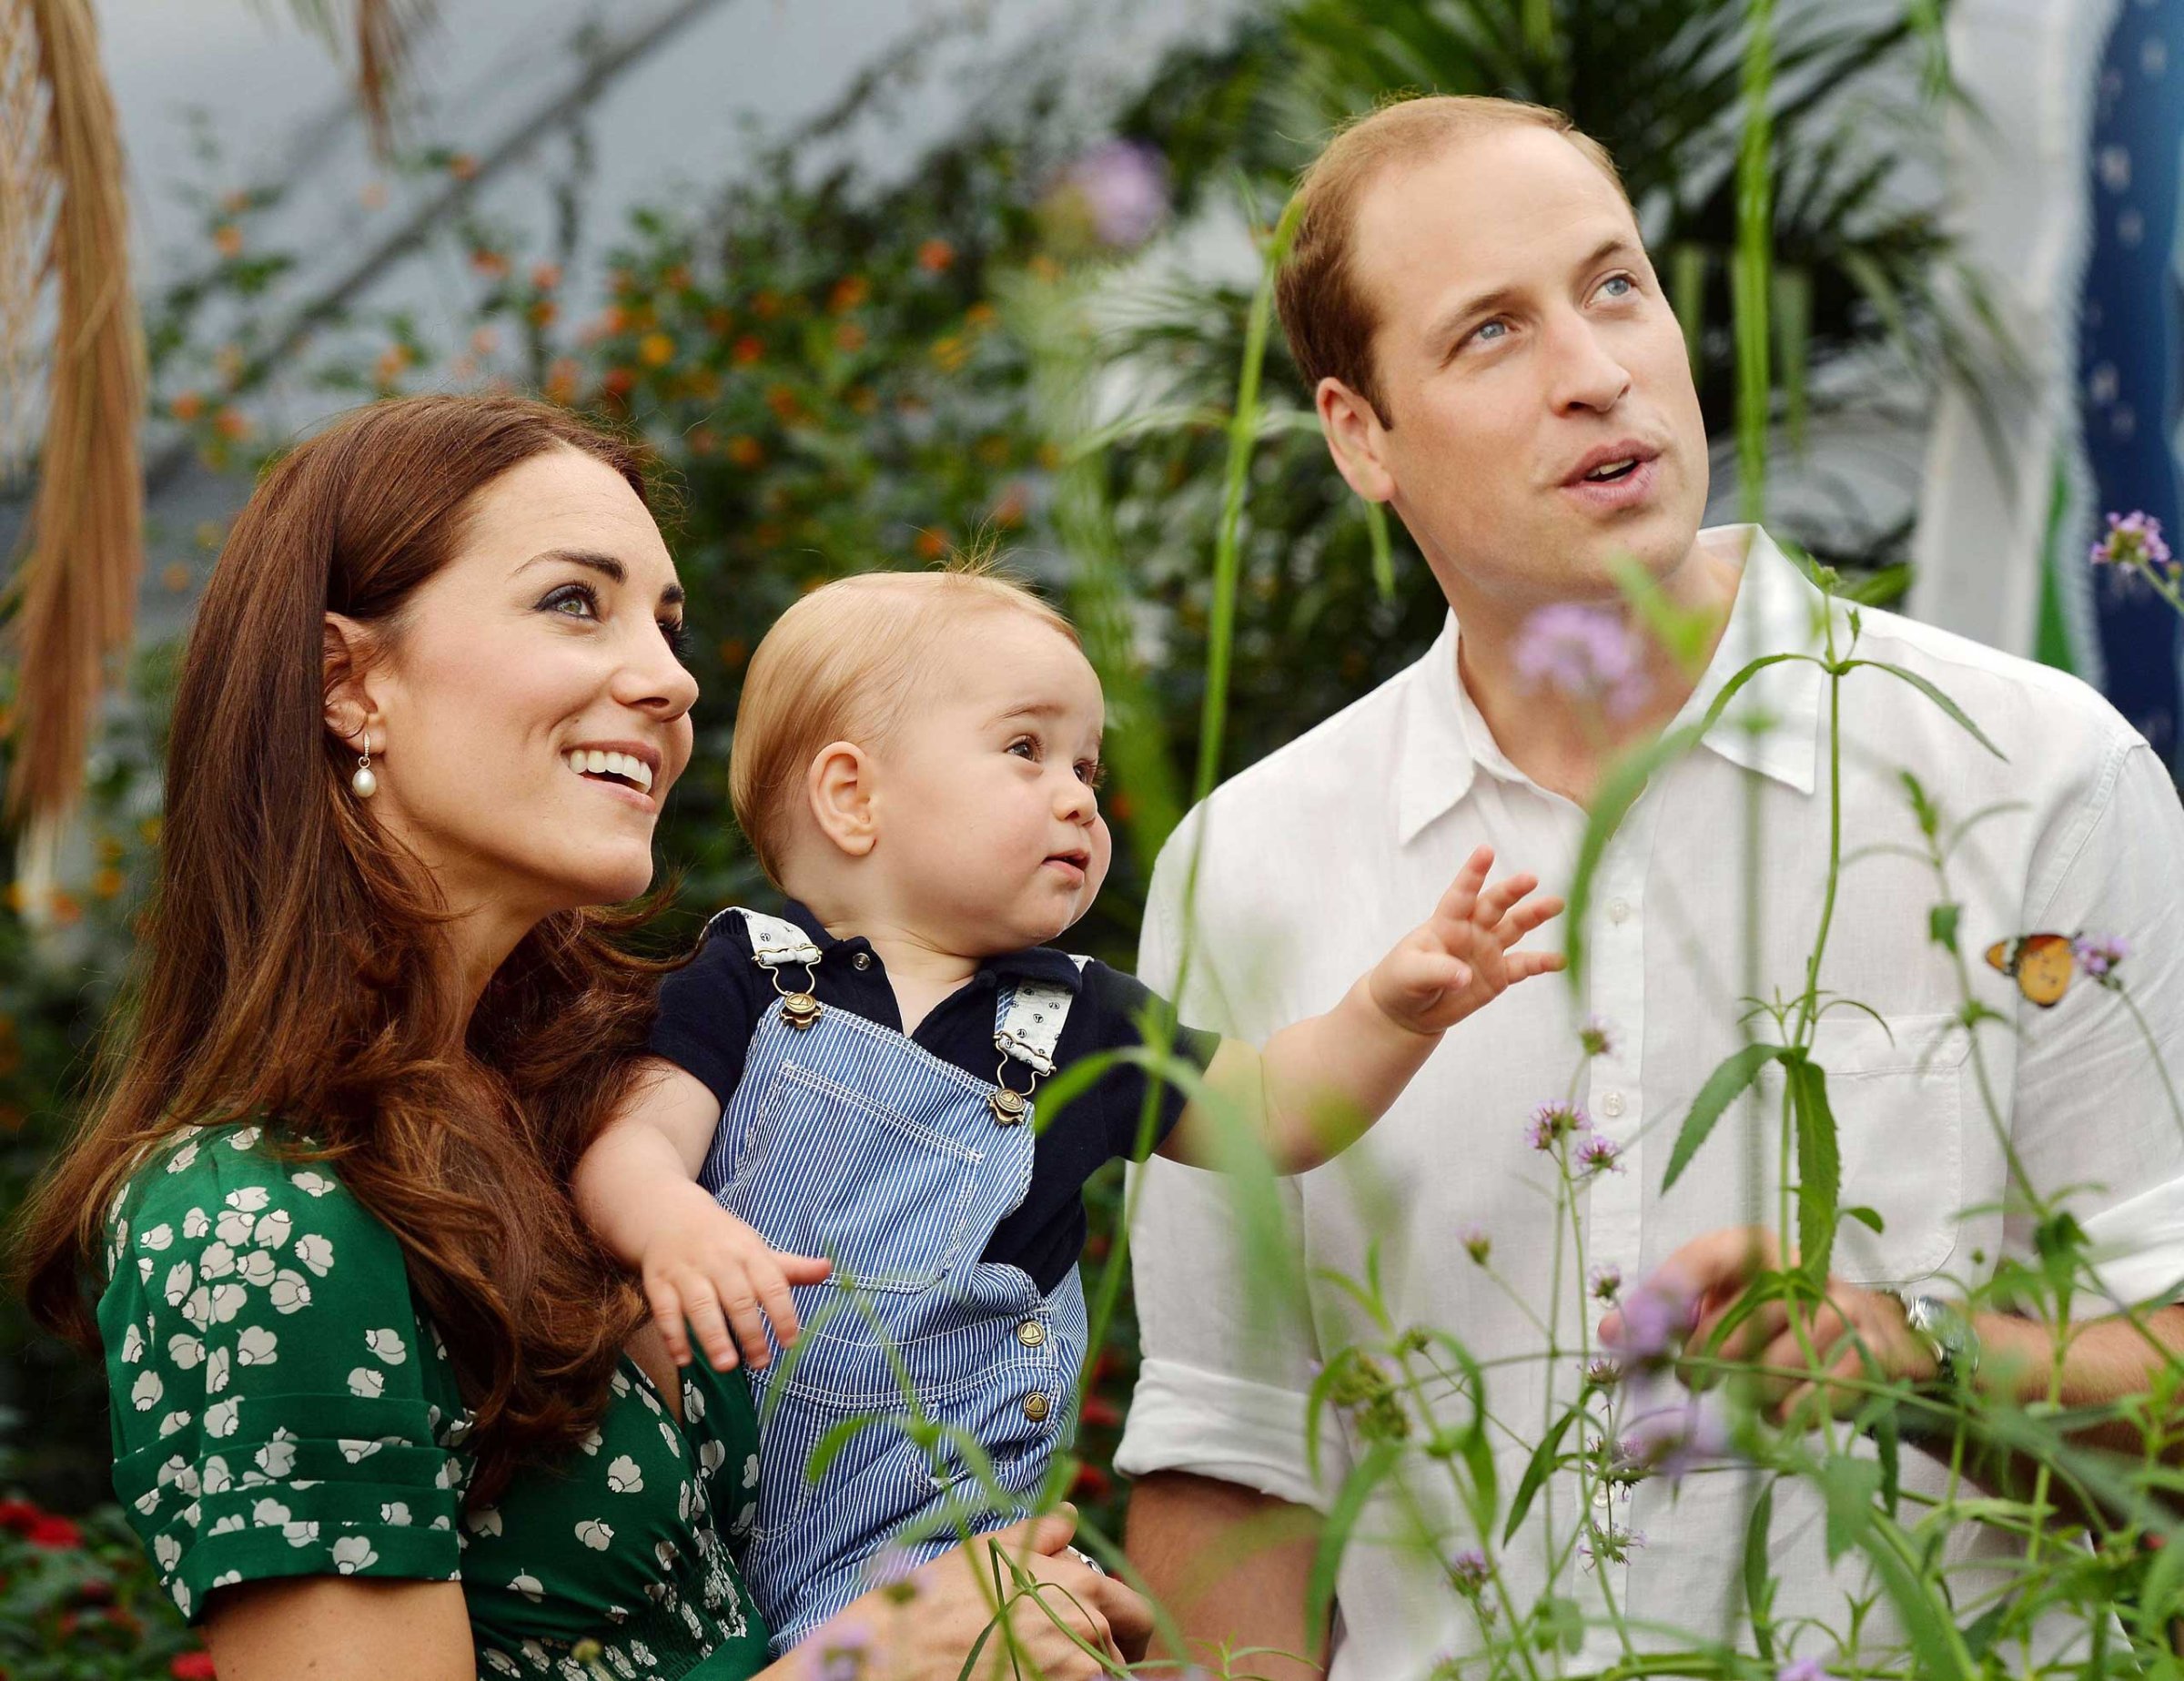 Prince William (L) and Catherine, Duchess of Cambridge with Prince George during a visit to the Sensational Butterflies exhibition at the Natural History Museum in London on July 2, 2014.